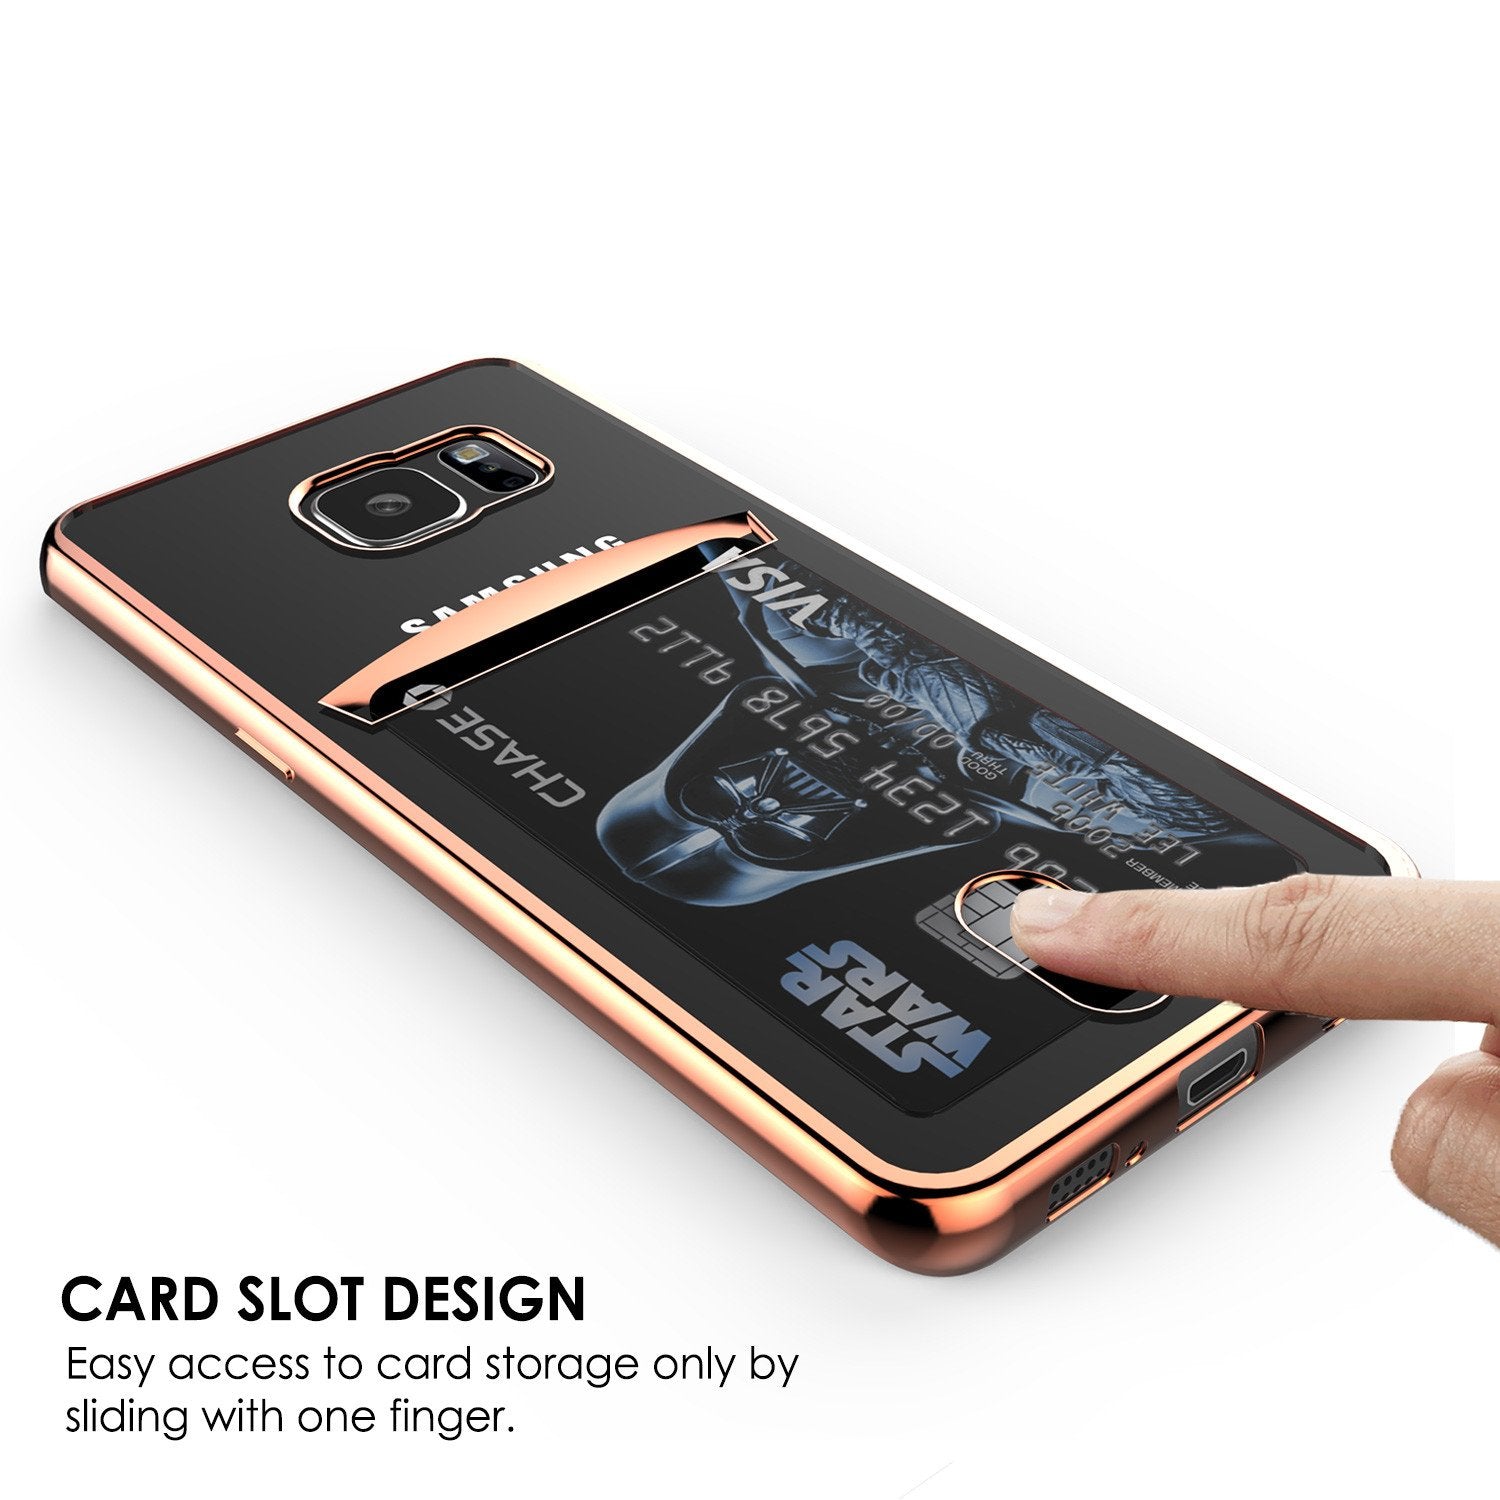 Galaxy S6 EDGE Case, PUNKCASE® LUCID Rose Gold Series | Card Slot | SHIELD Screen Protector